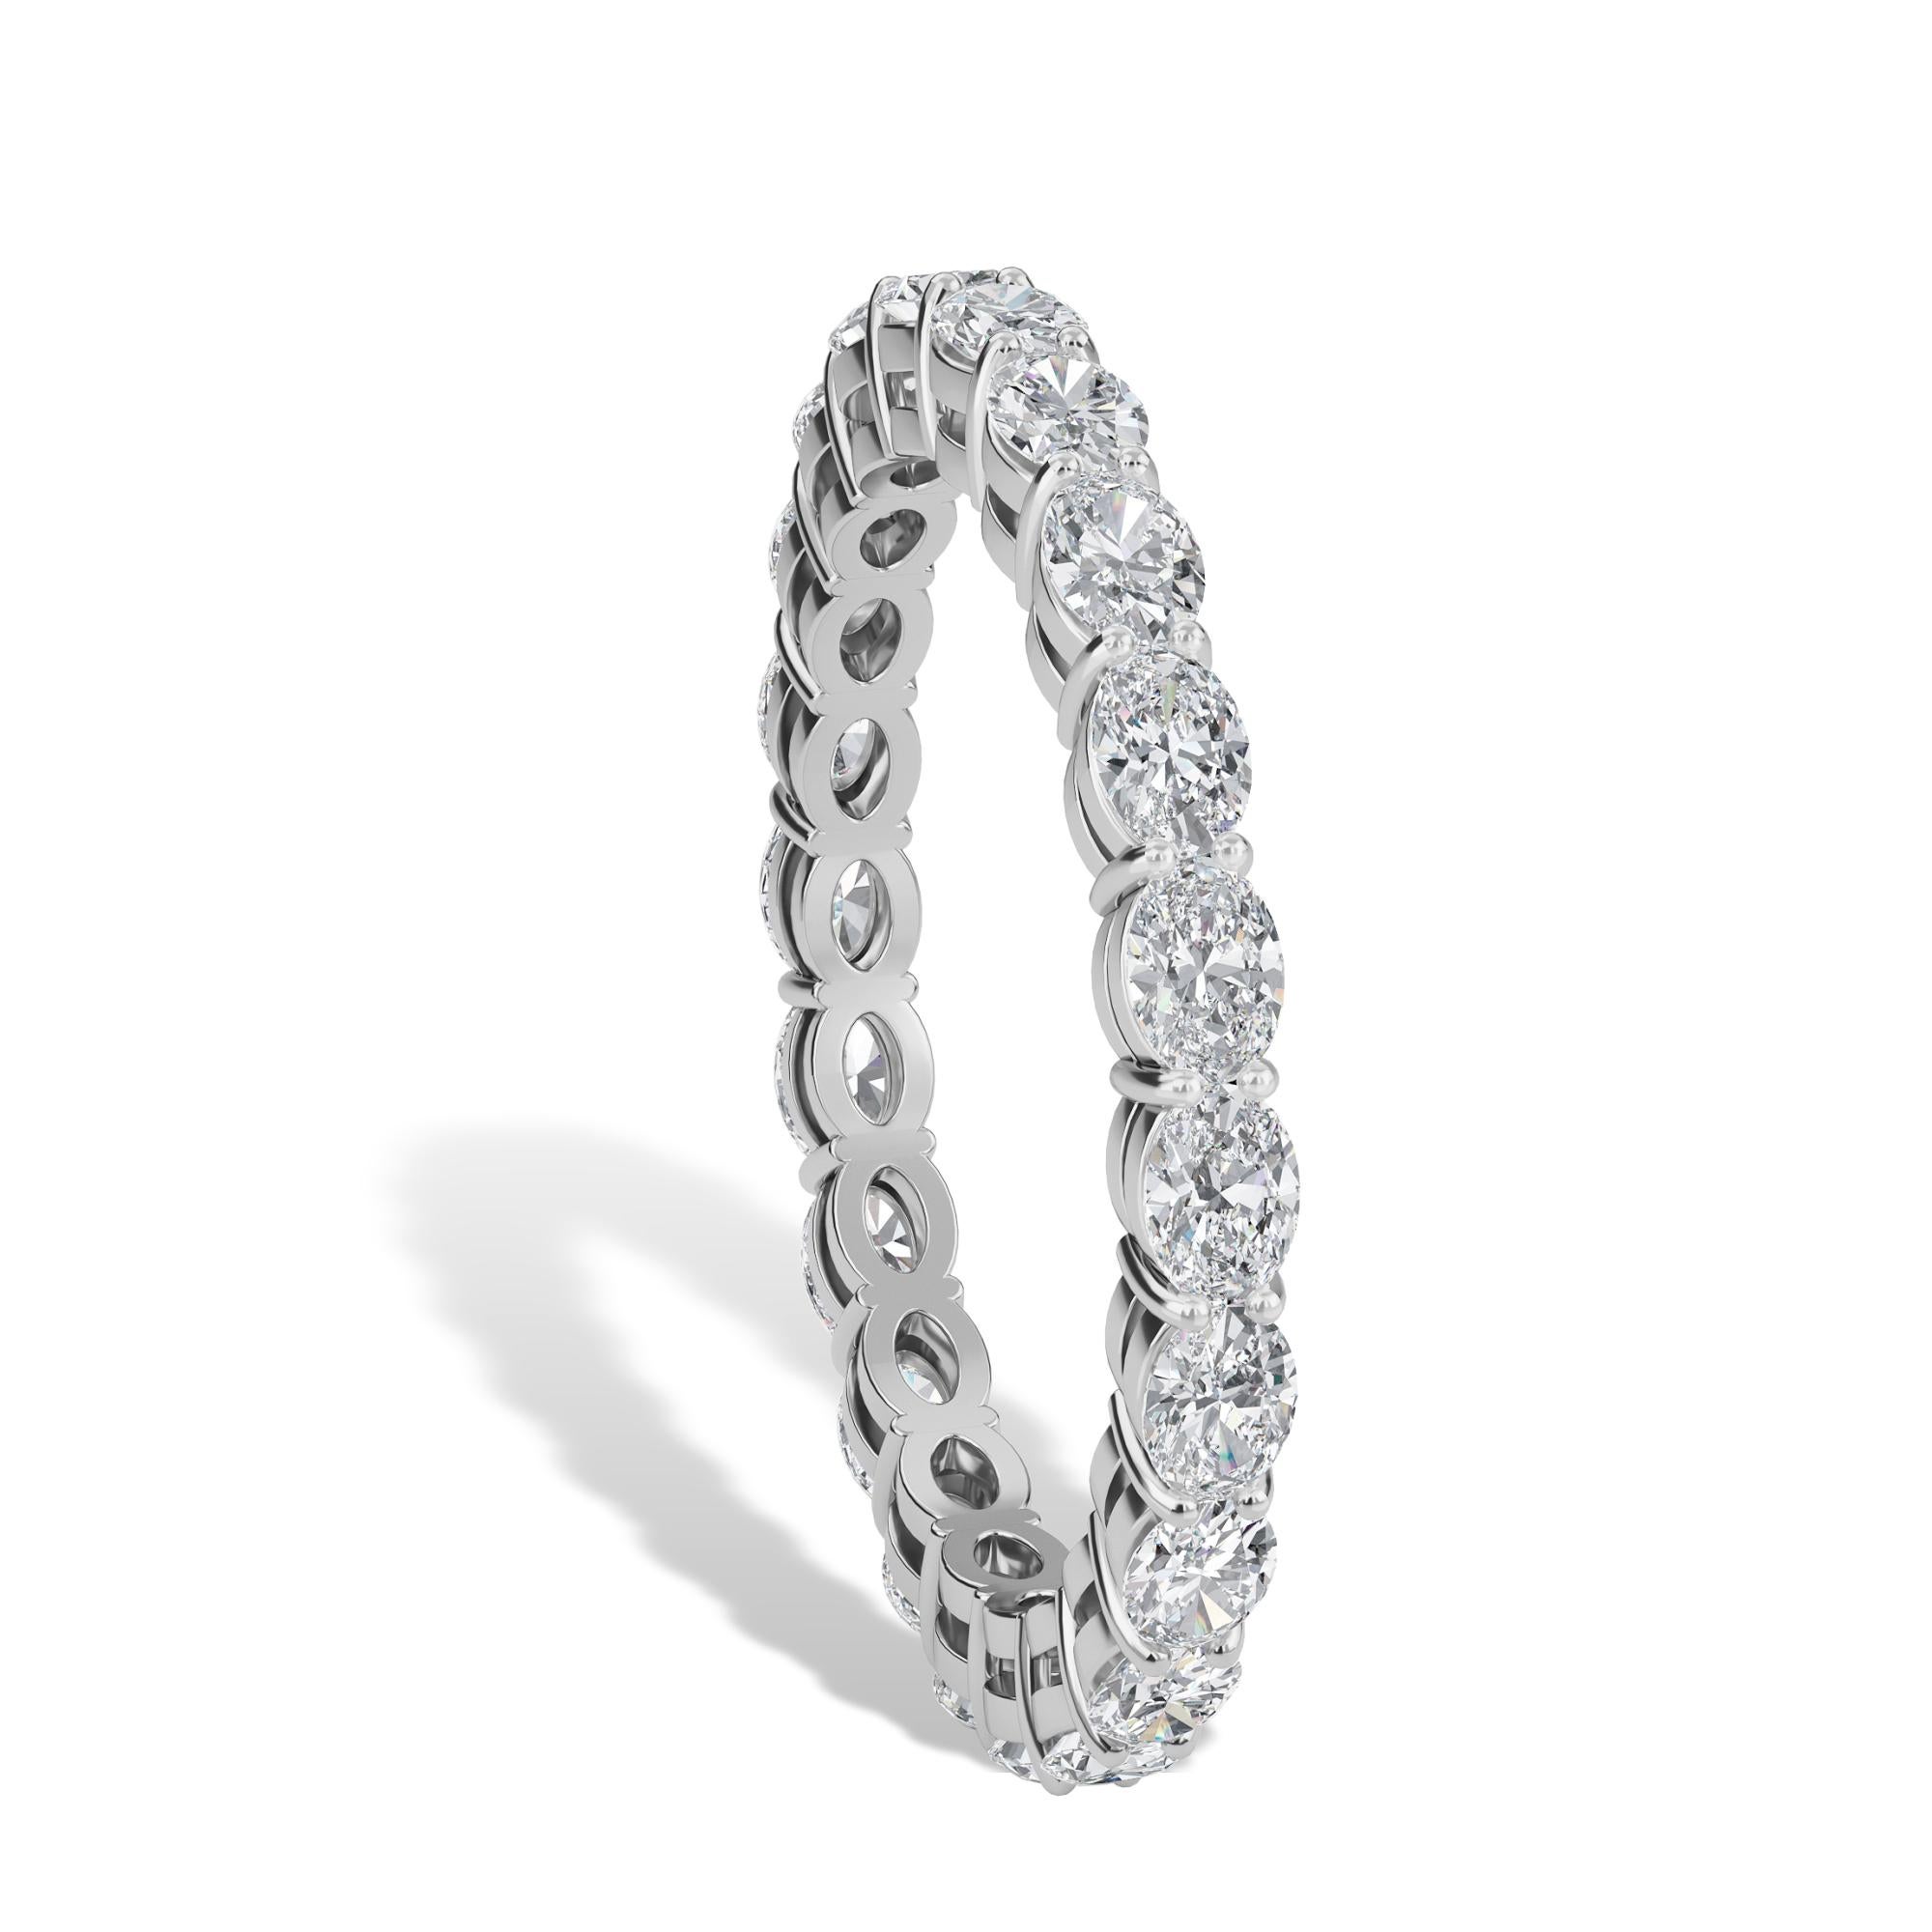 The Oval Horizontal Eternity Band features 22 diamonds, set east west, with a total weight of 1.33TCW. The diamonds are F Color, VS-SI Clarity, and are set in a Shared-Prong Platinum setting, in a Finger Size 6.75. 

Message us for additional finger